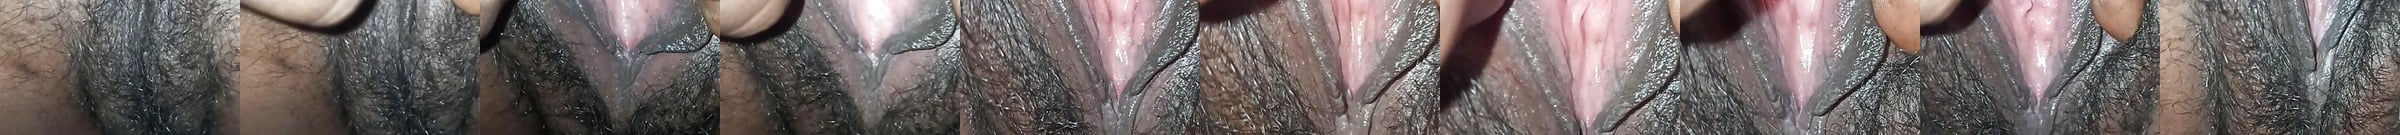 Real Desi MILF Showing Powdered Pussy HD Porn Be XHamster XHamster